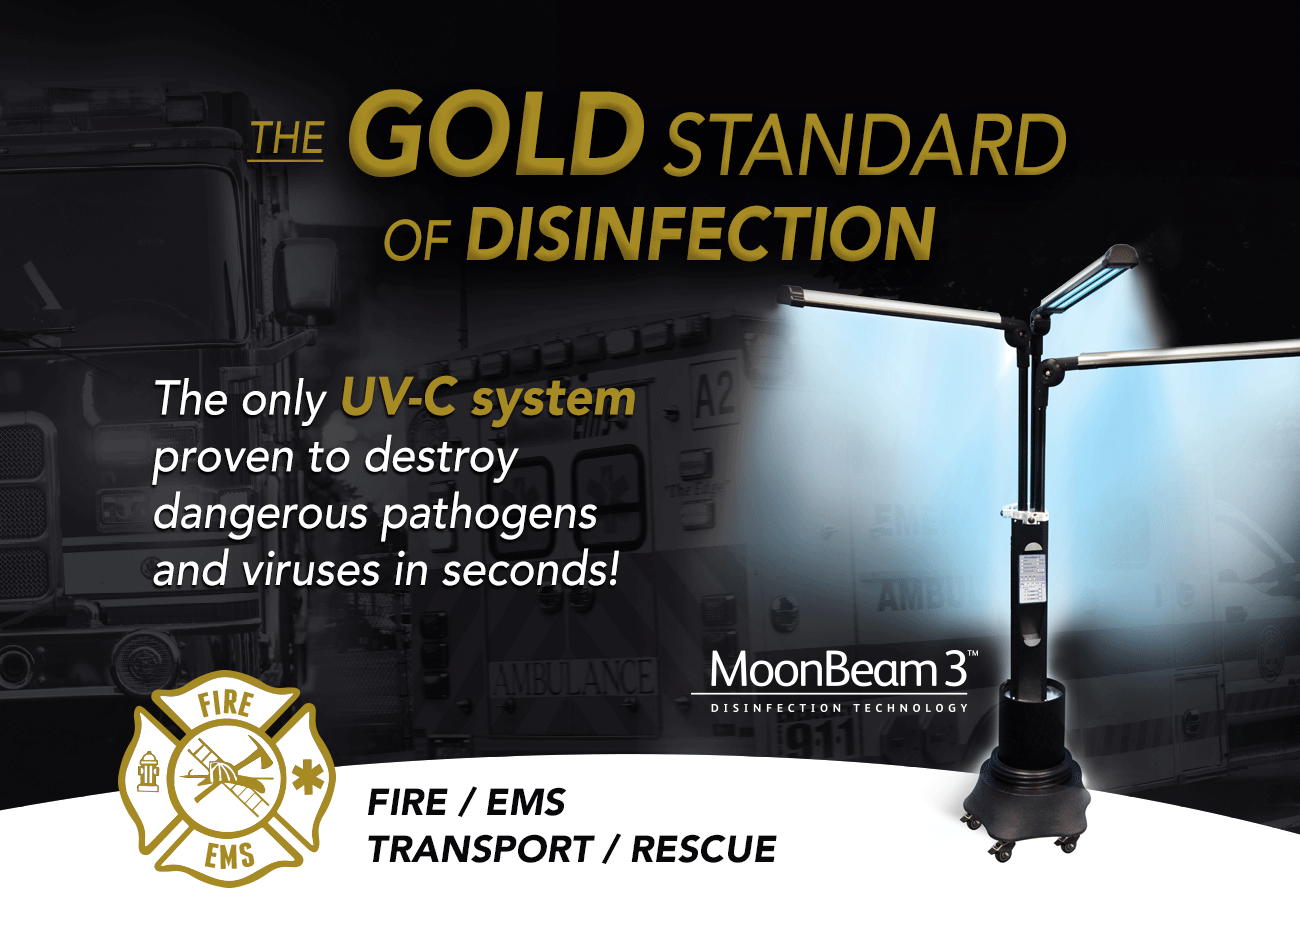 The Gold Standard of Disinfection